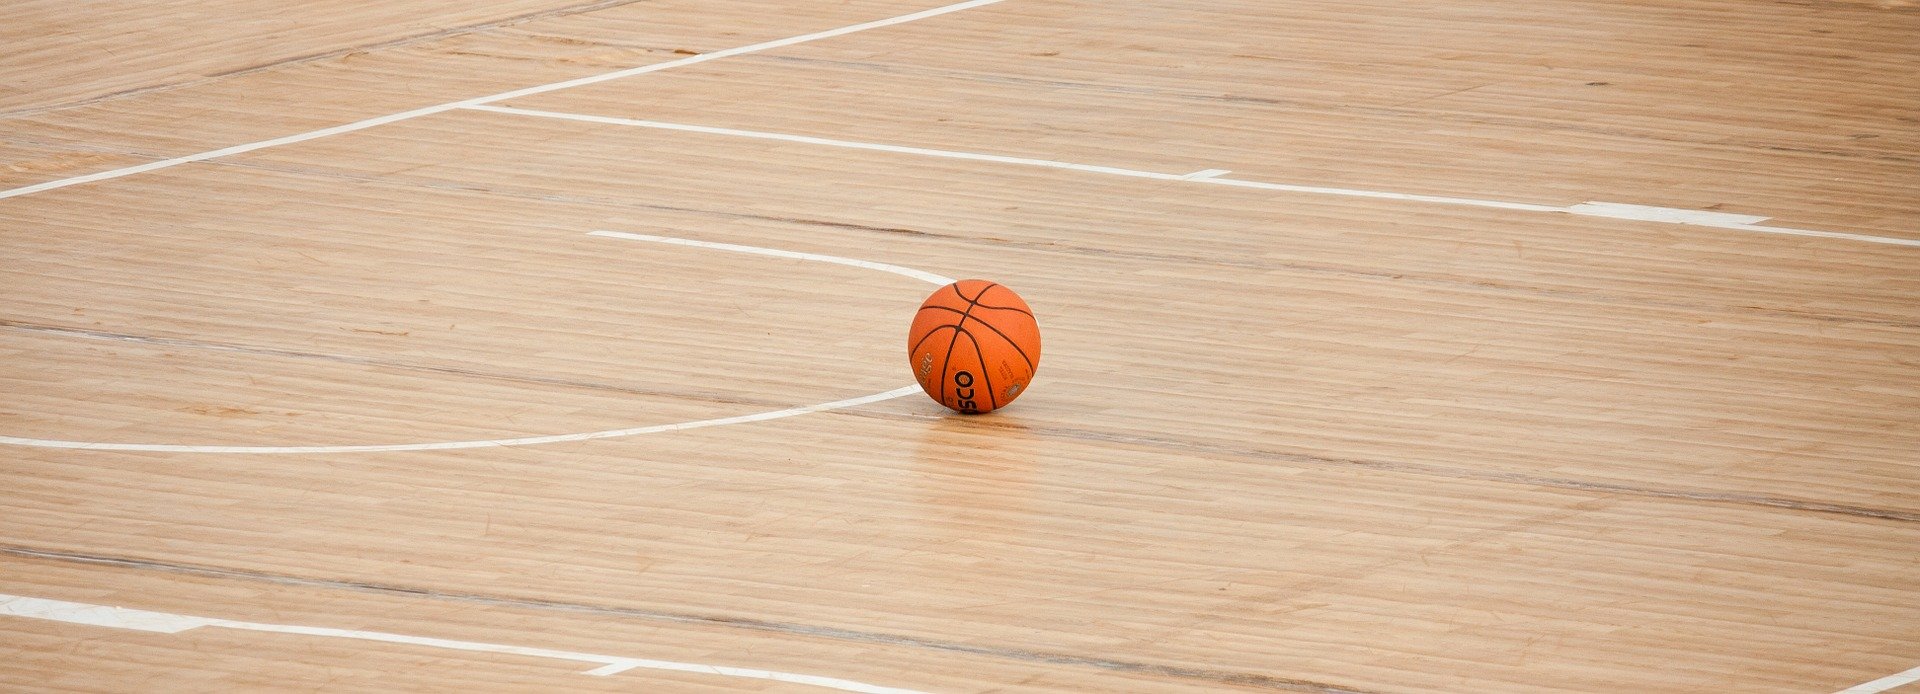 Basketball resting on court.